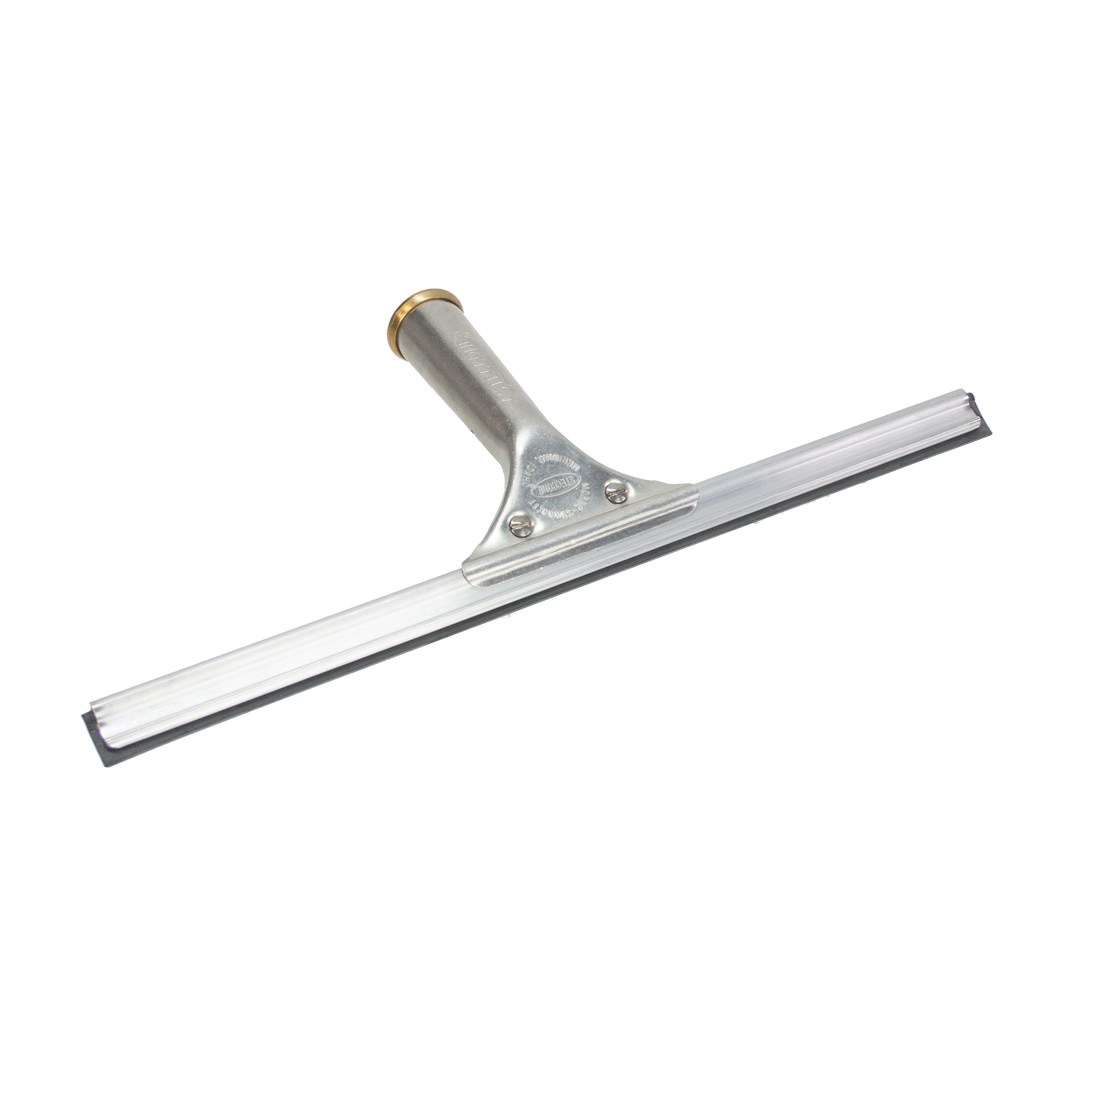 Steccone Professional Window Squeegee